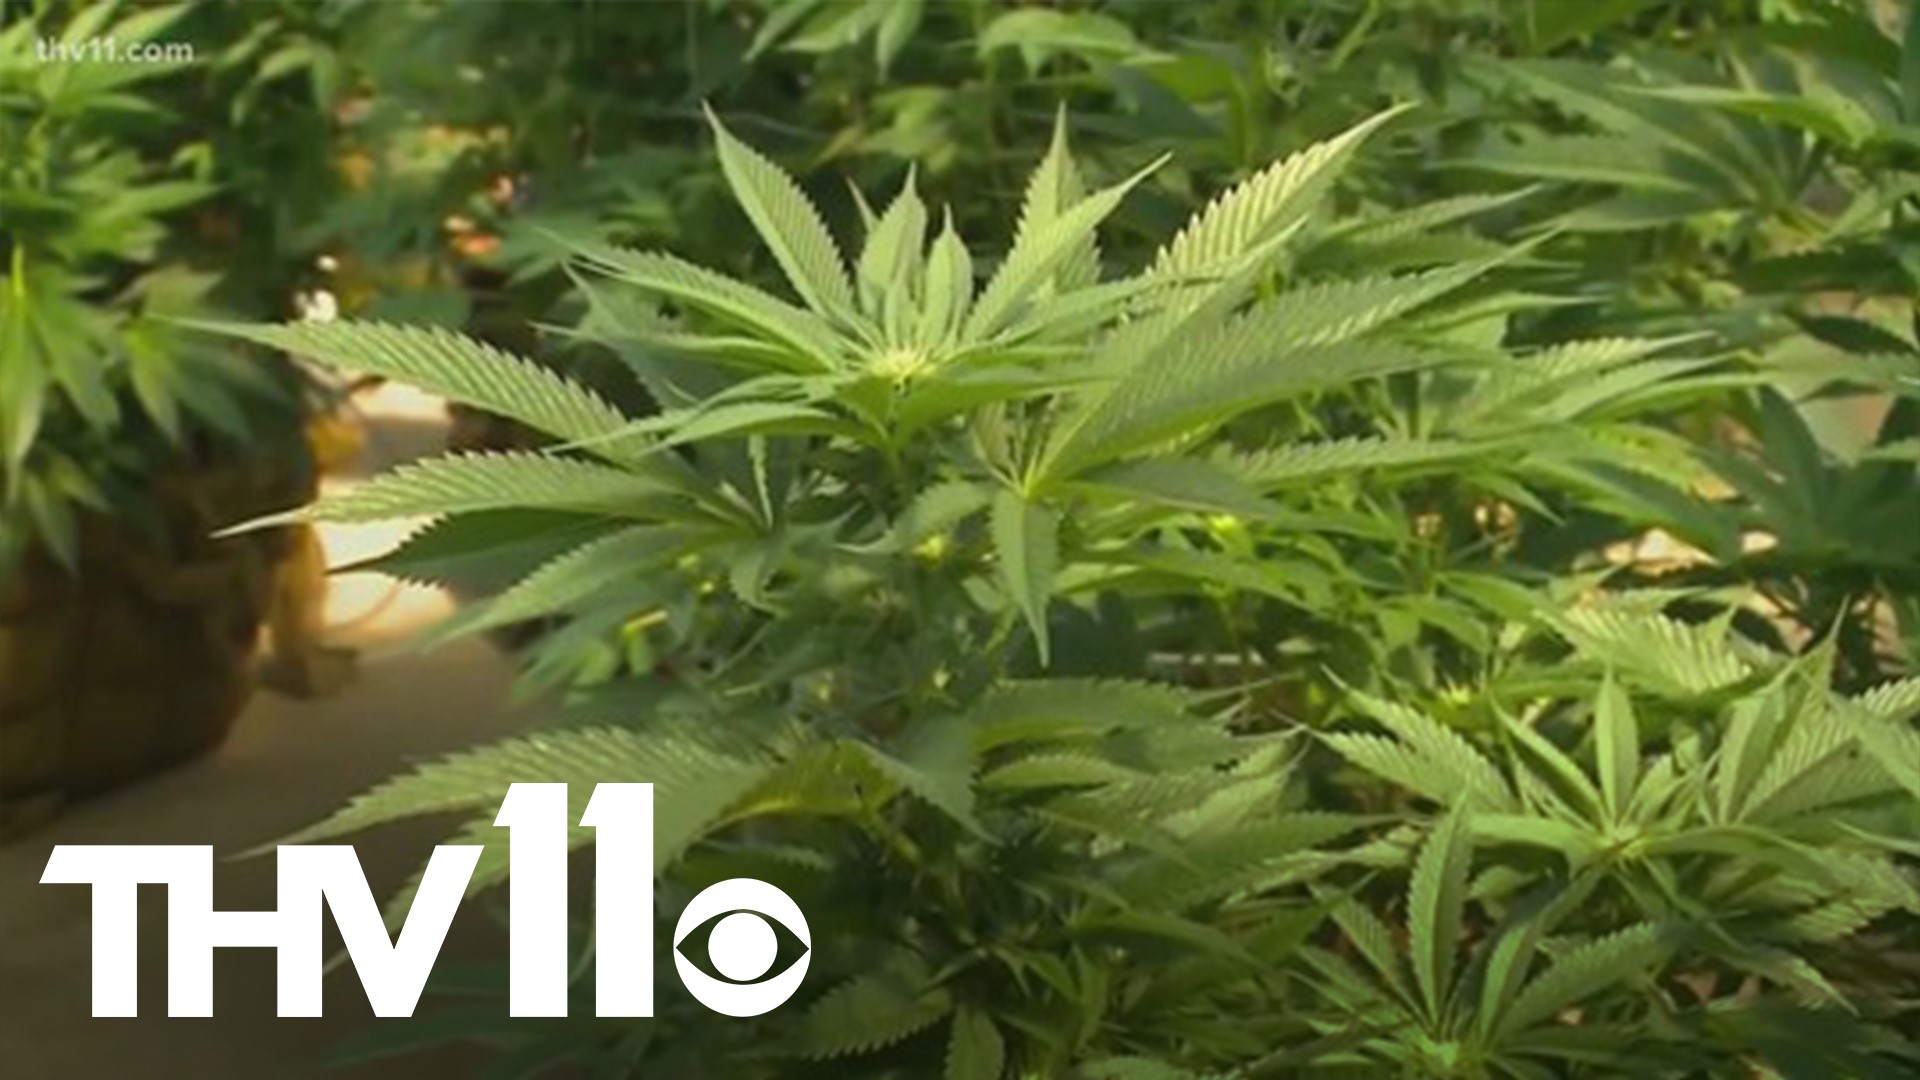 The Medical Marijuana Commission voted on a rule change that will allow the final two licenses to be distributed.